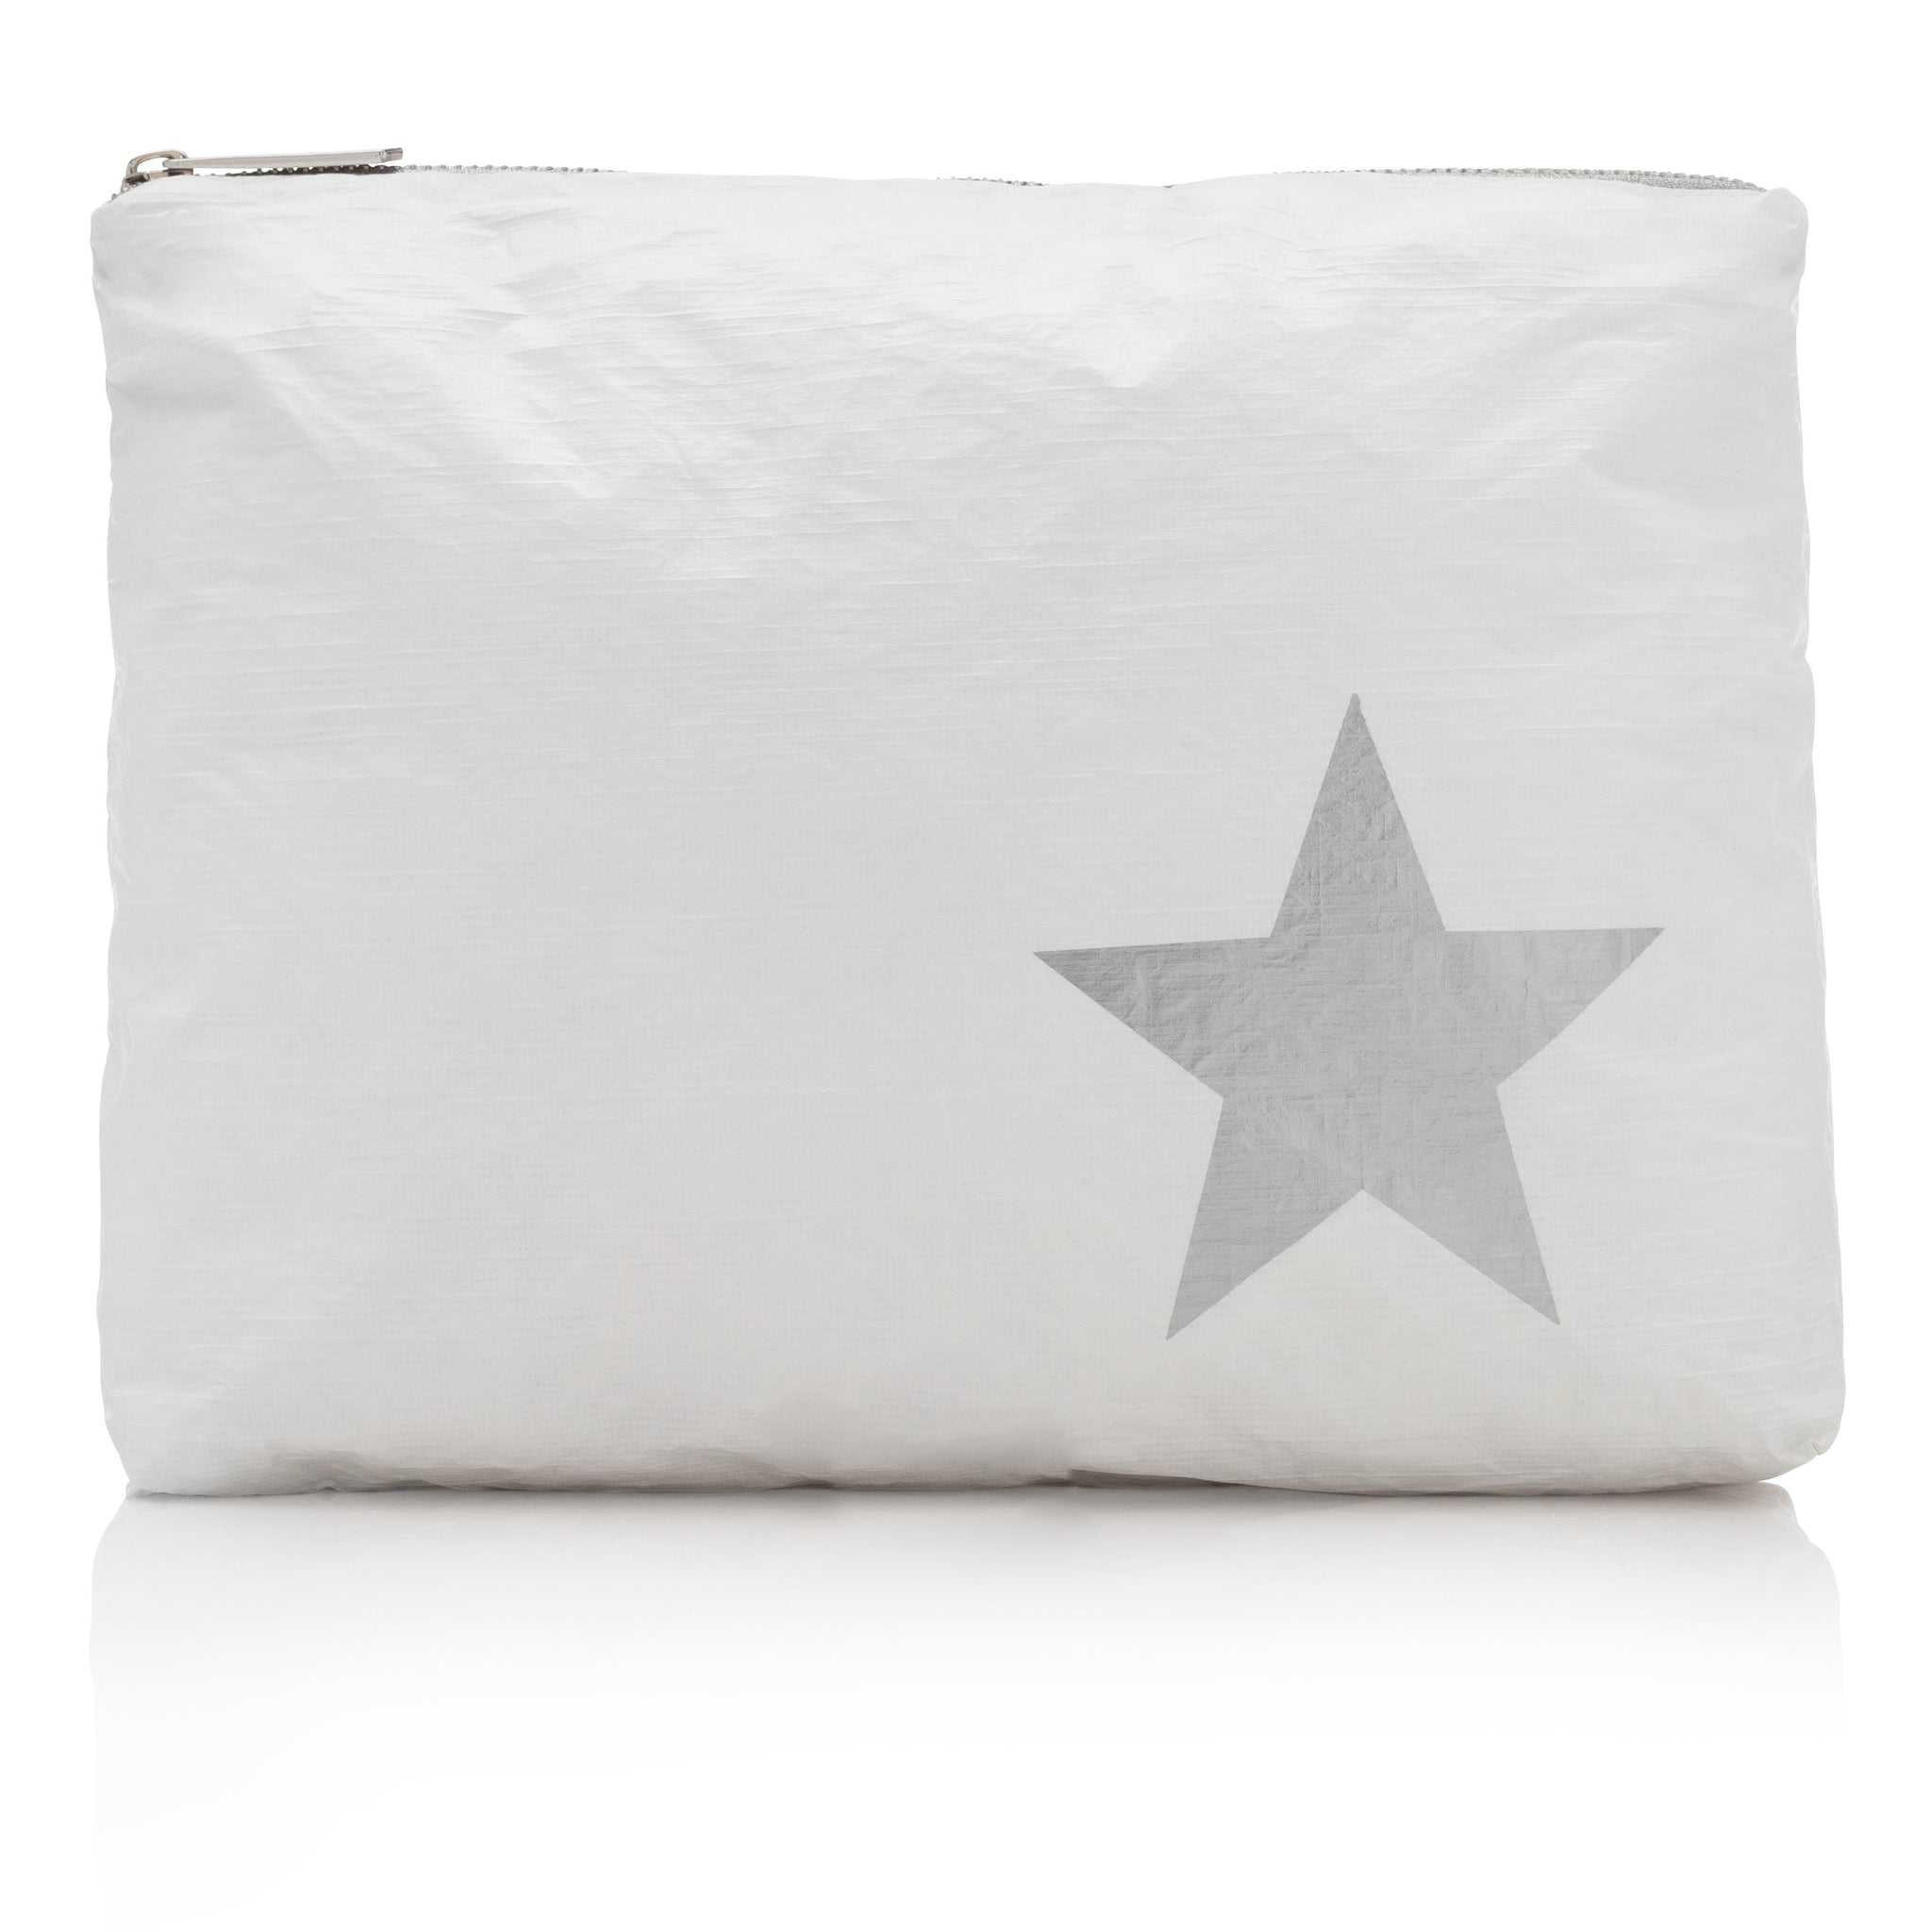 Medium Zipper Pack in Shimmer White with Silver Star